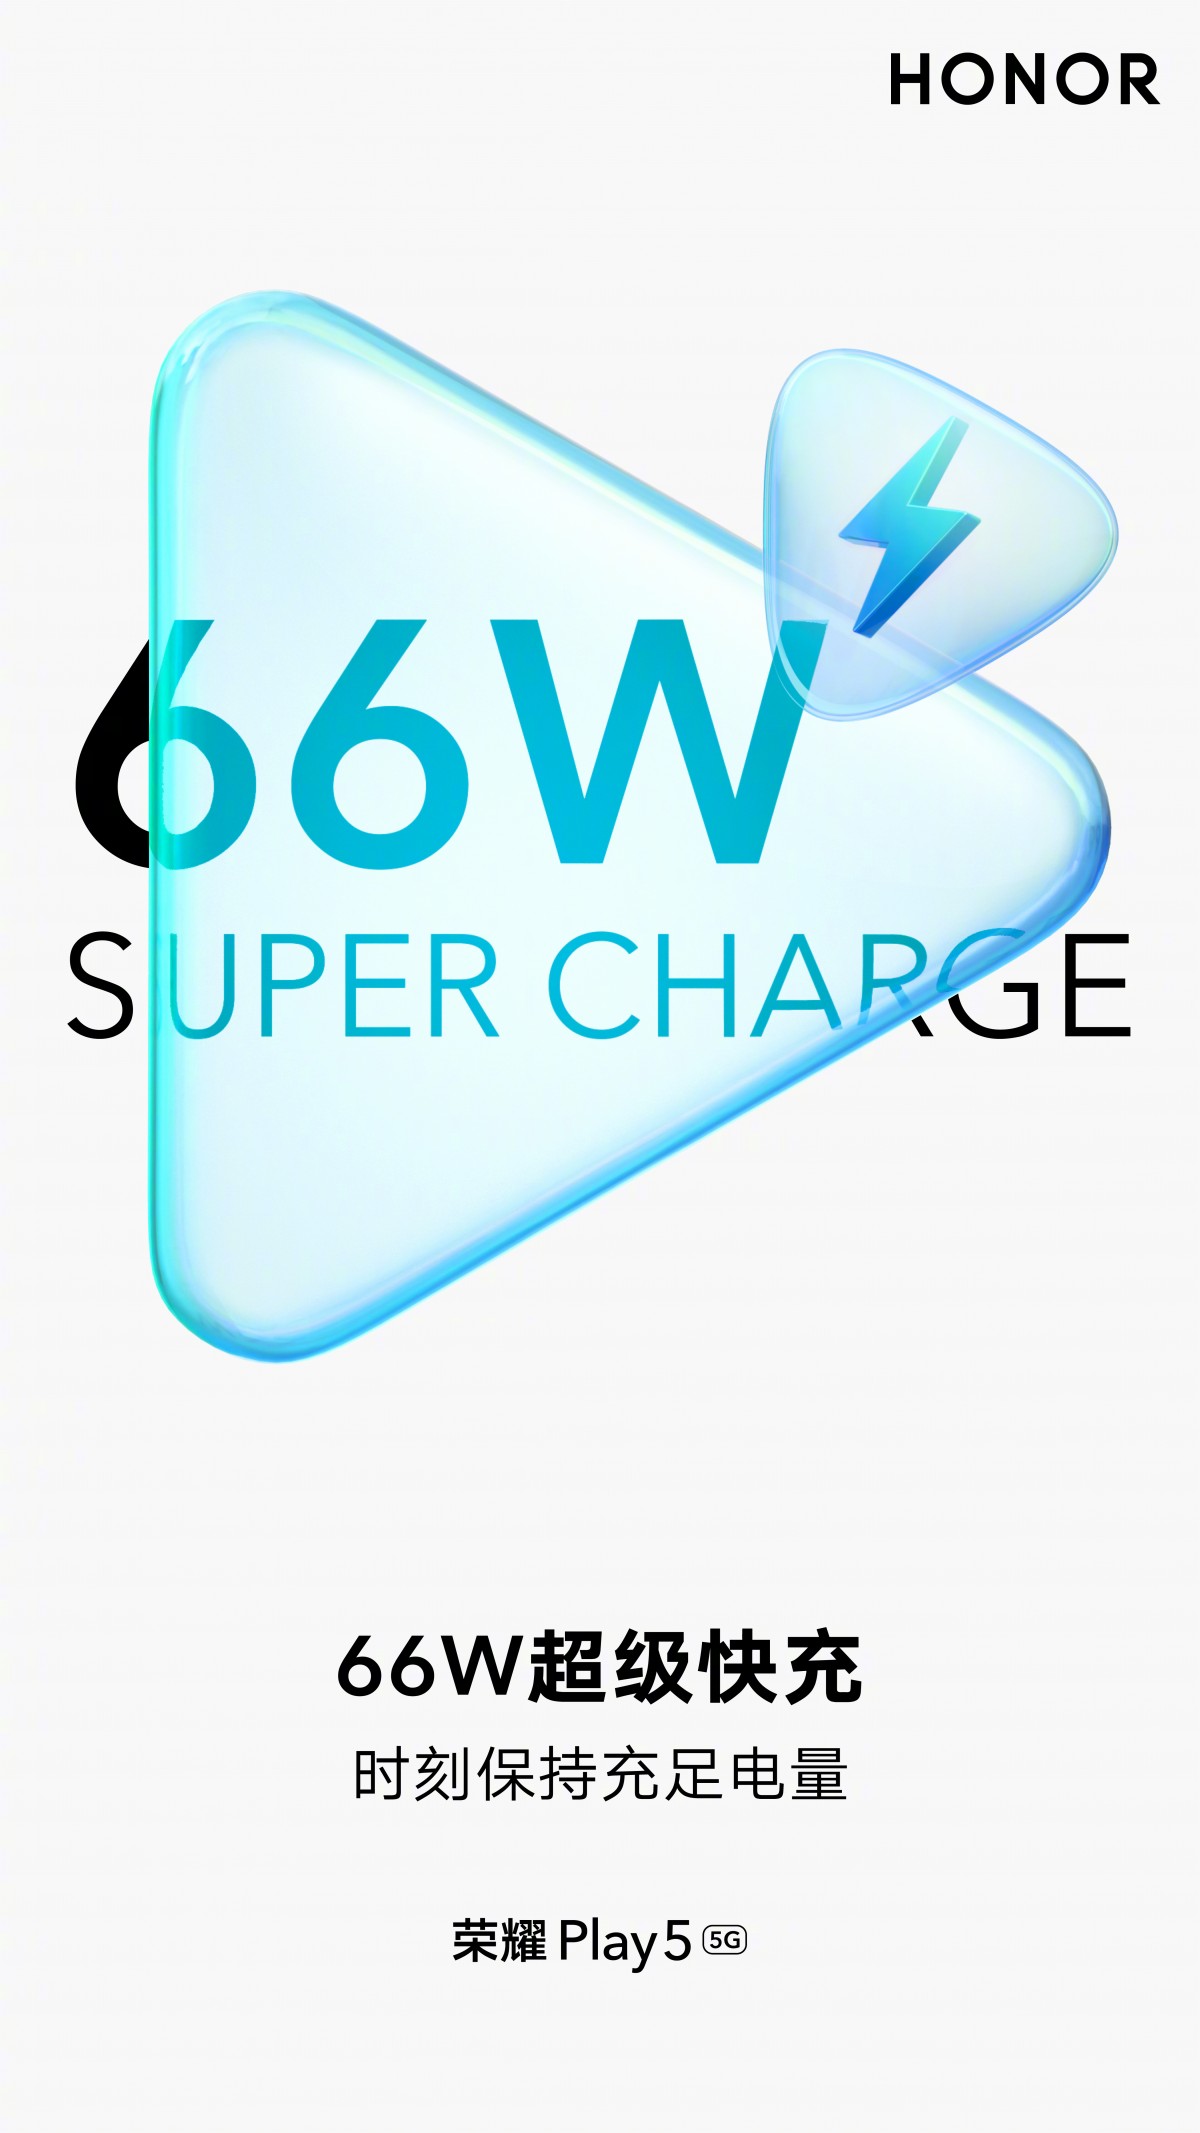 Honor confirms 66W Super Charge on the Honor Play 5